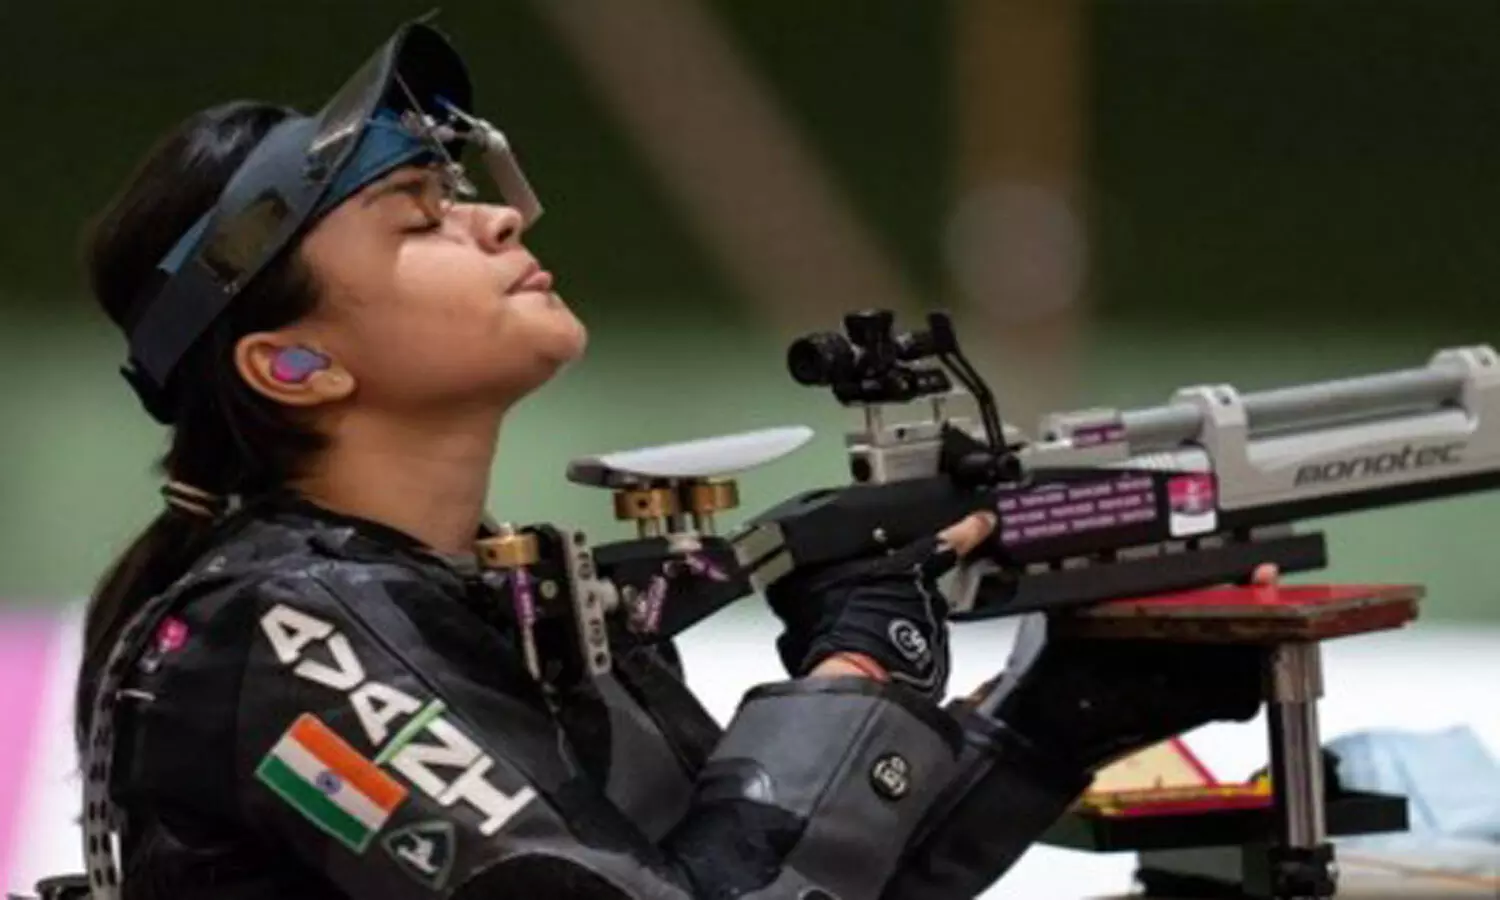 Avani Lekhara won the gold medal equalling world record score in the final.